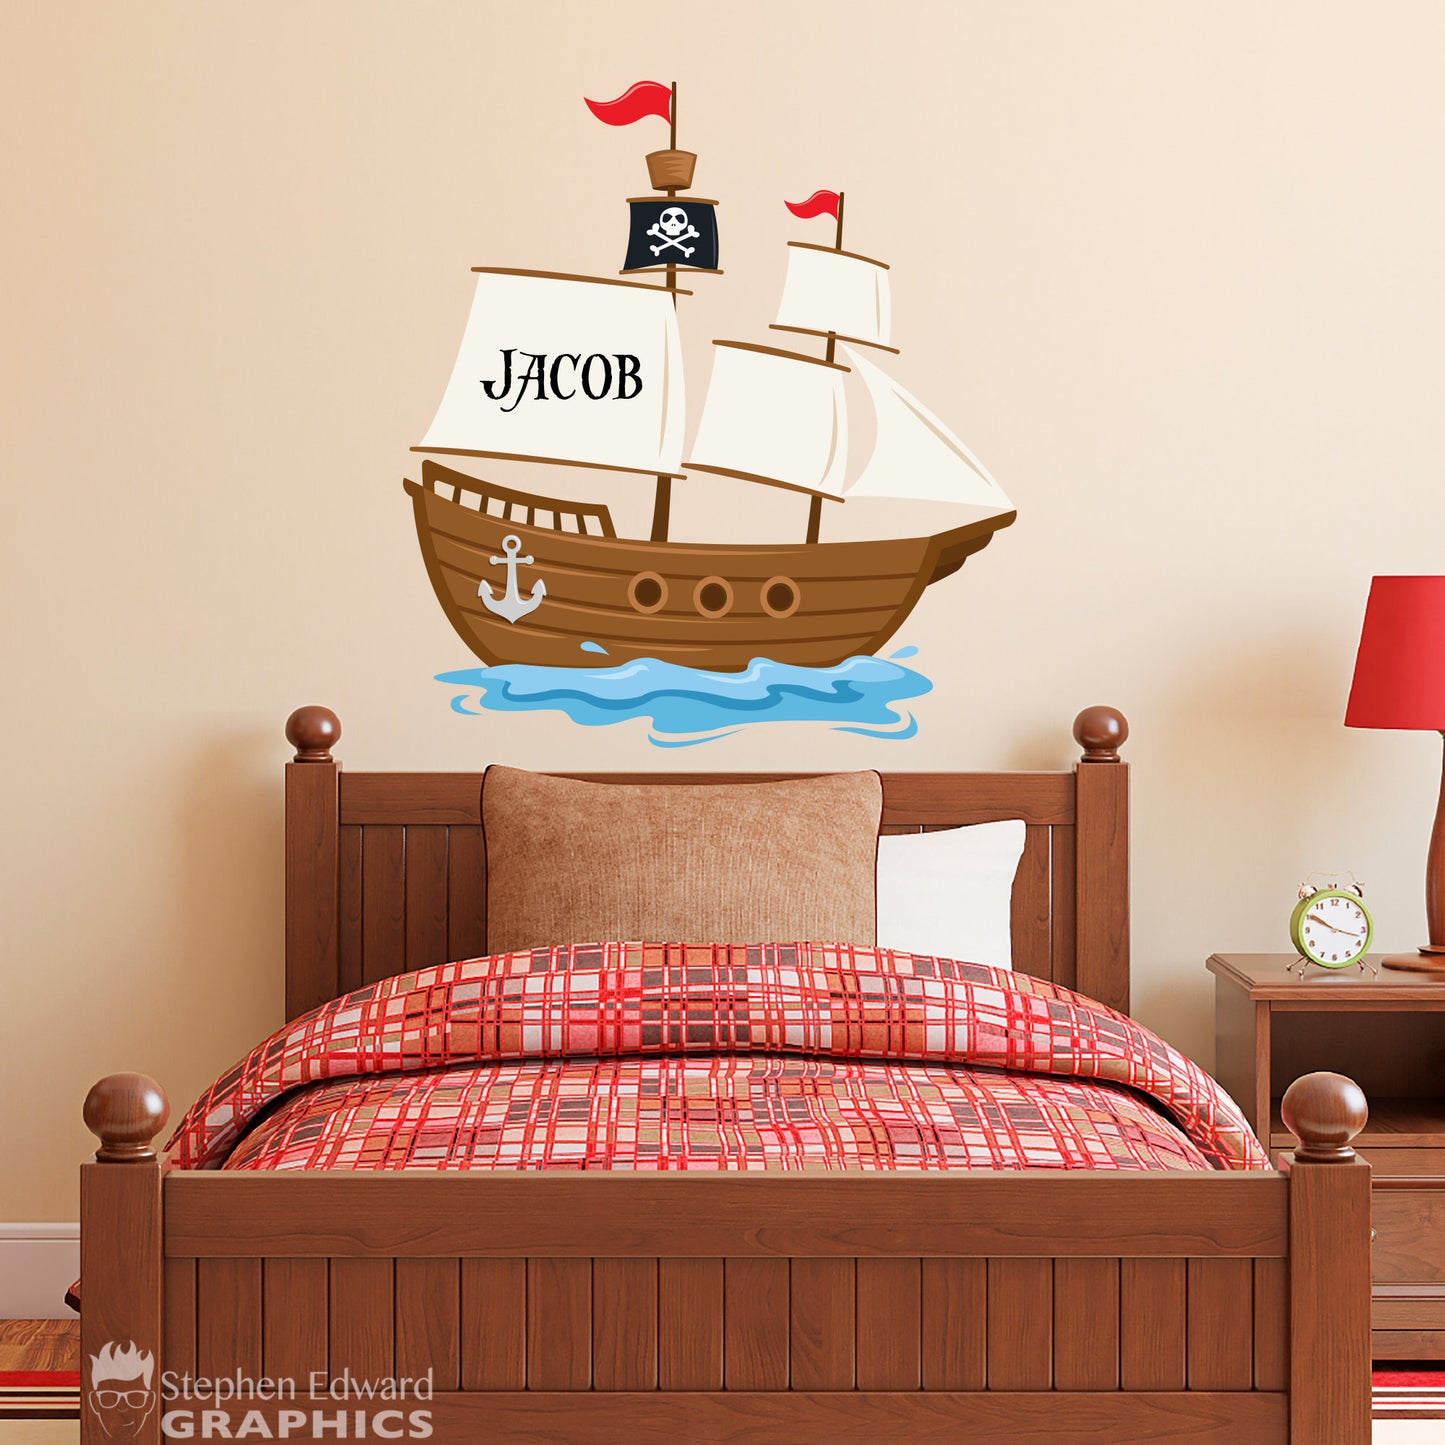 Pirate Ship Wall Decal with Personalized Name - Pirate Decor for Boy Bedroom - Children Wall Decals